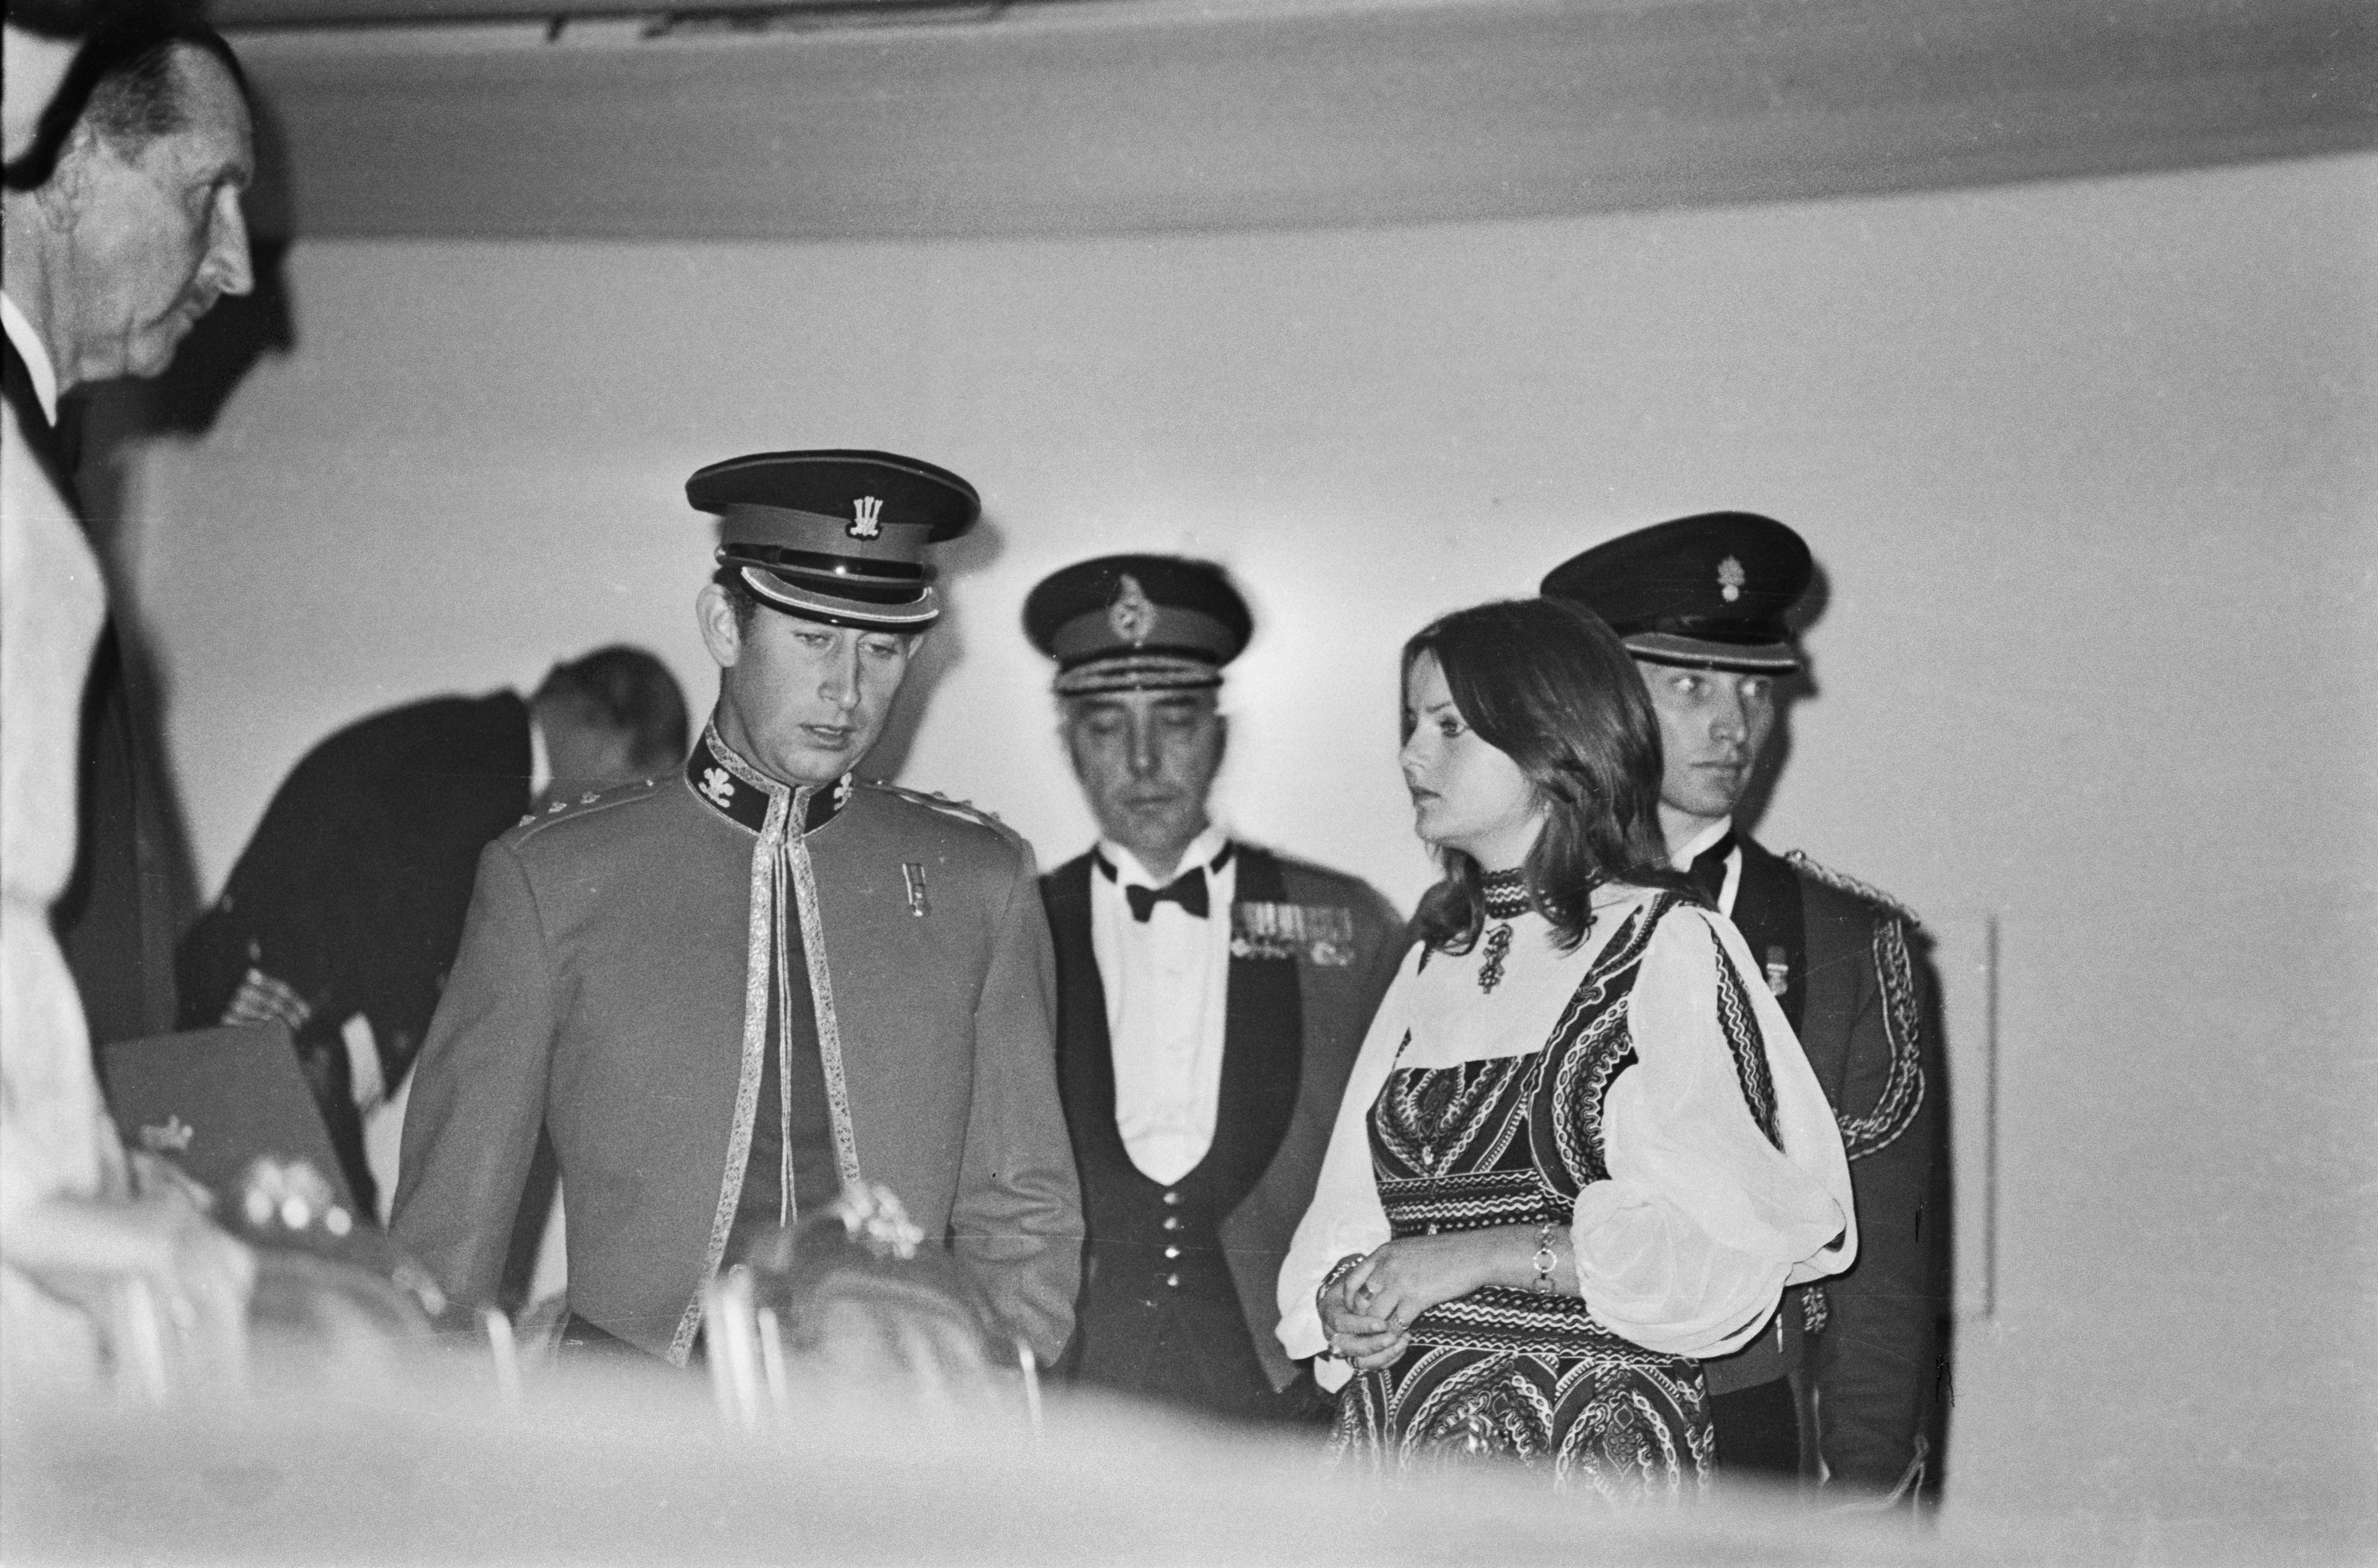 Prince Charles and Lady Jane Wellesley at the Royal Tournament, held at Earls Court Exhibition Centre in London, in 1972